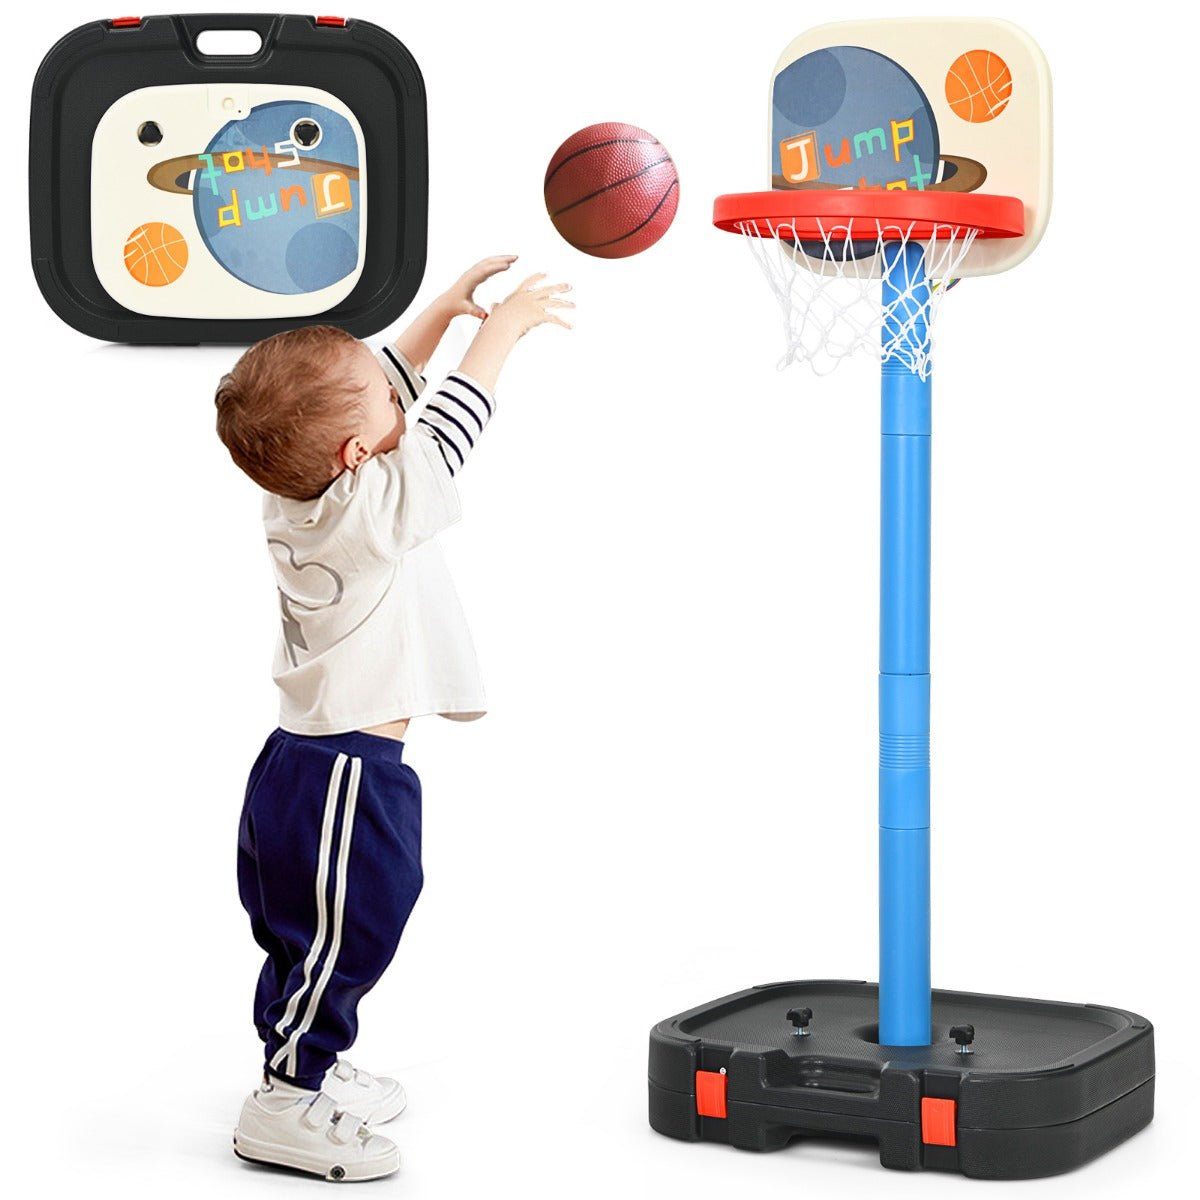 Active Play Combo: 2-in-1 Basketball Set with Ring Toss Fun